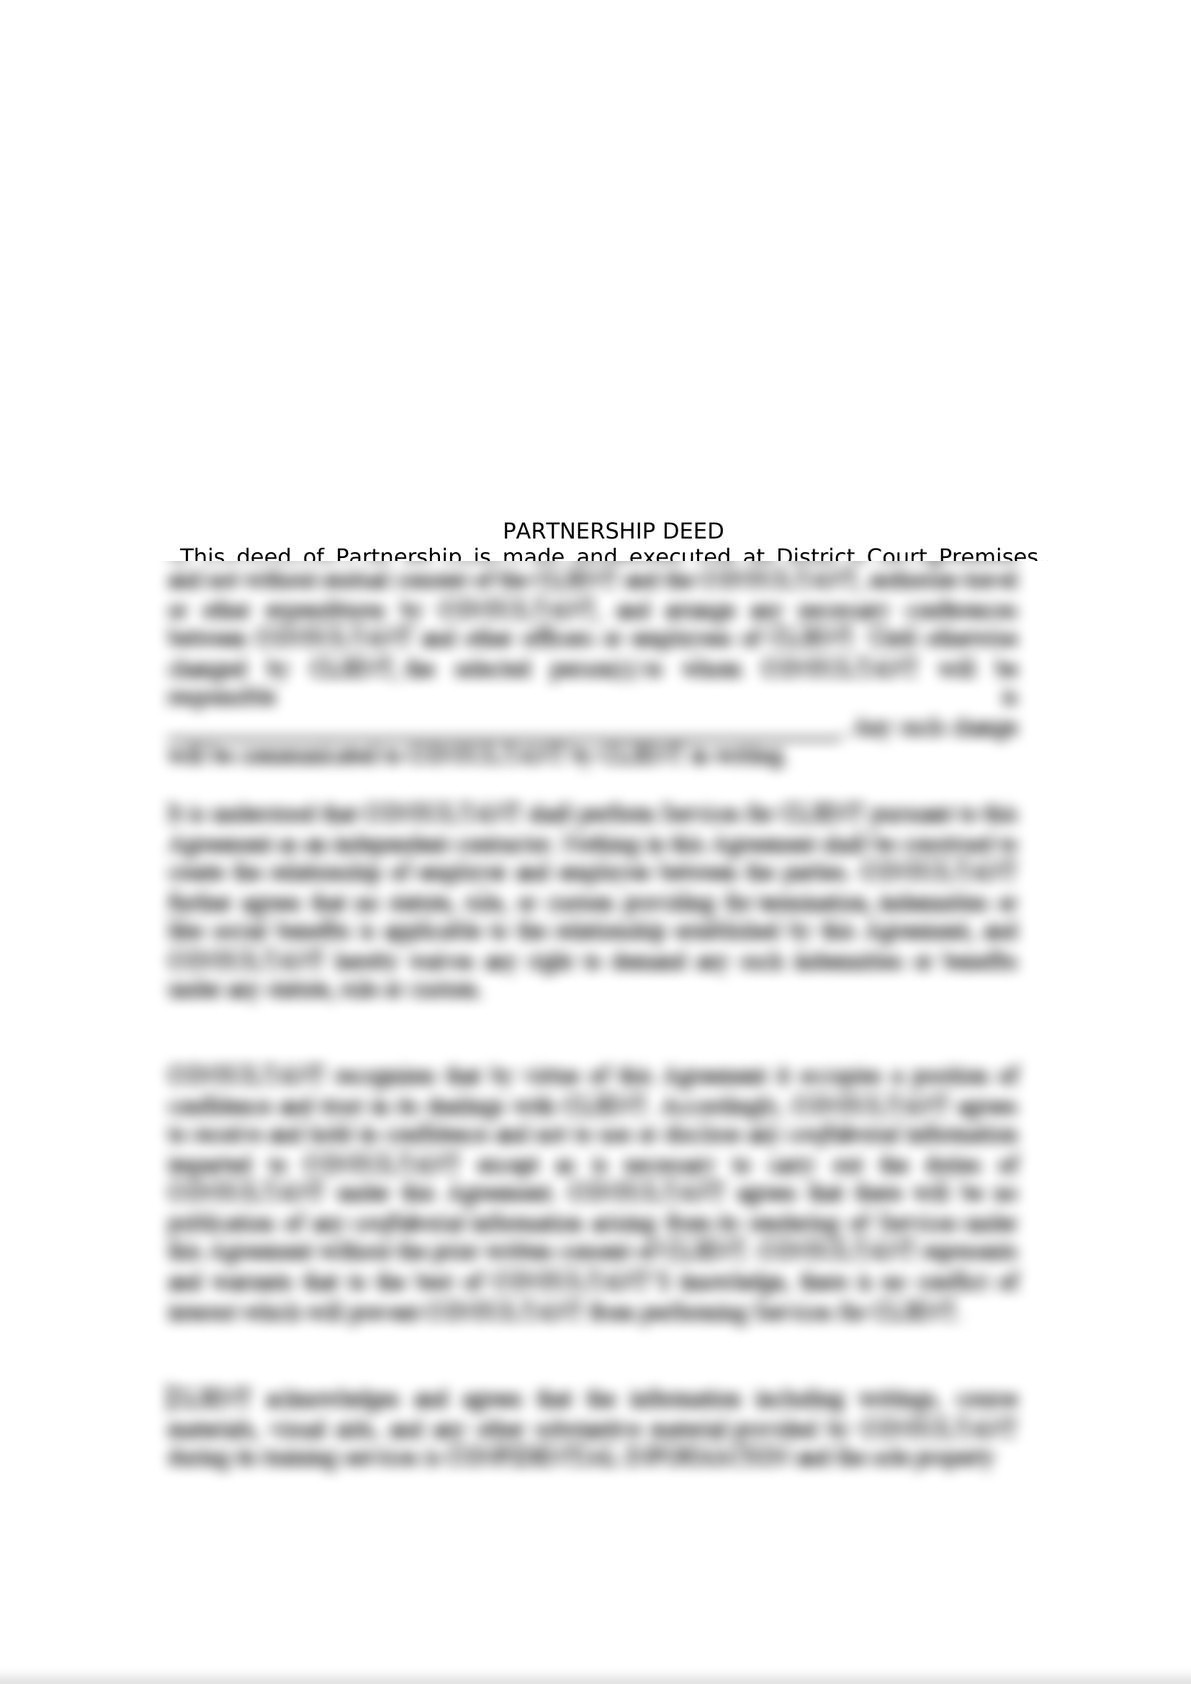 Partnership agreement sample.  For other related legal documents feel free to ask-0